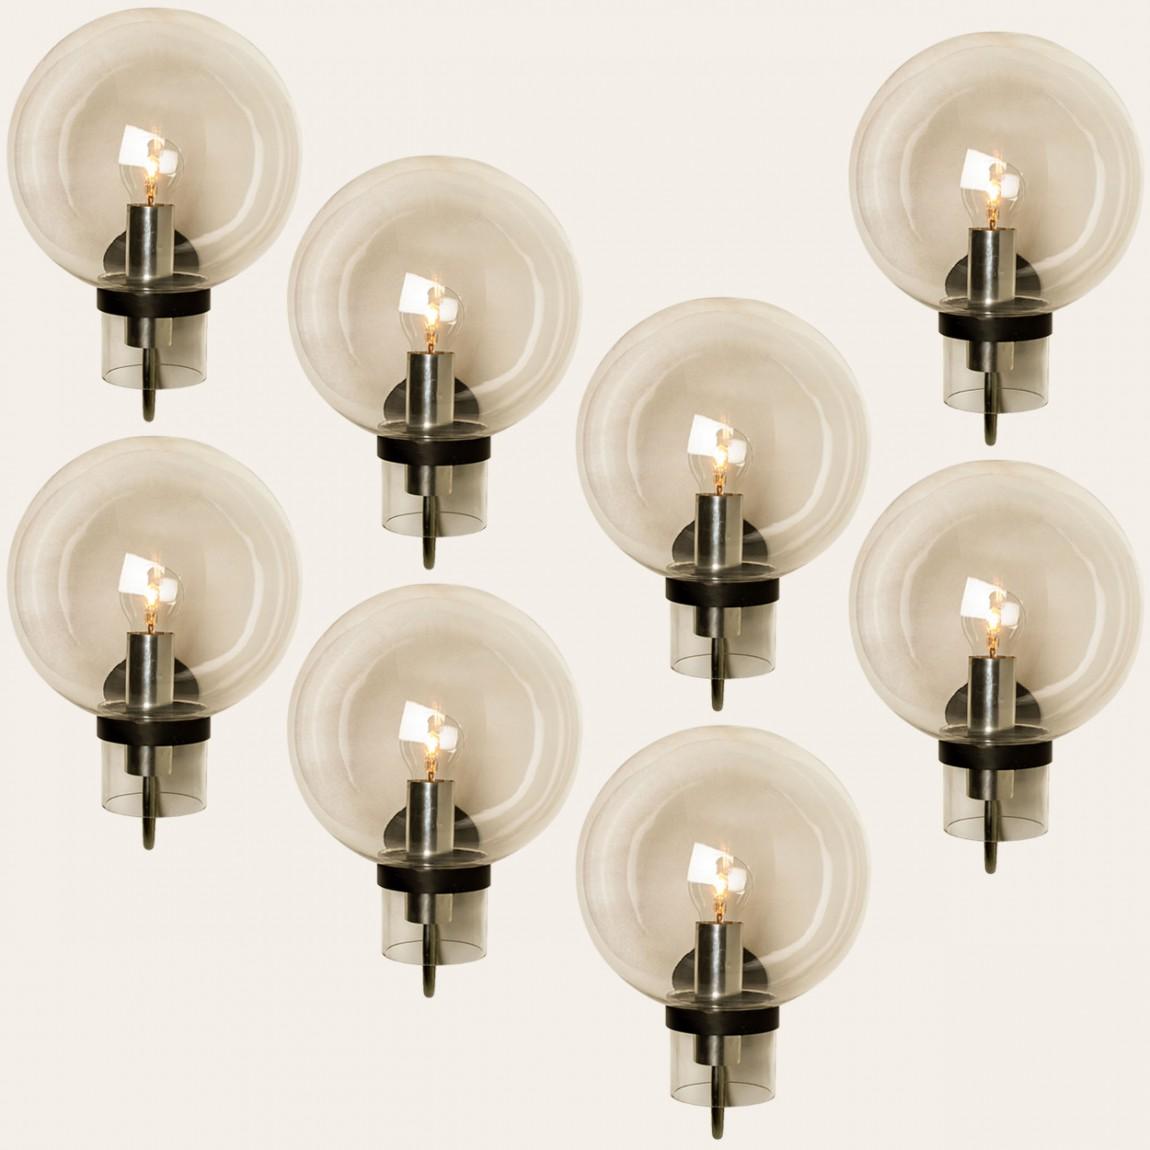 Large quantity of beautiful hand blown clear glass wall lights designed and manufactured by Glashütte Limburg, Germany around 1975.

Beautiful craftsmanship. These midcentury vintage lights feature handmade, elaborate clear bubble glass with a